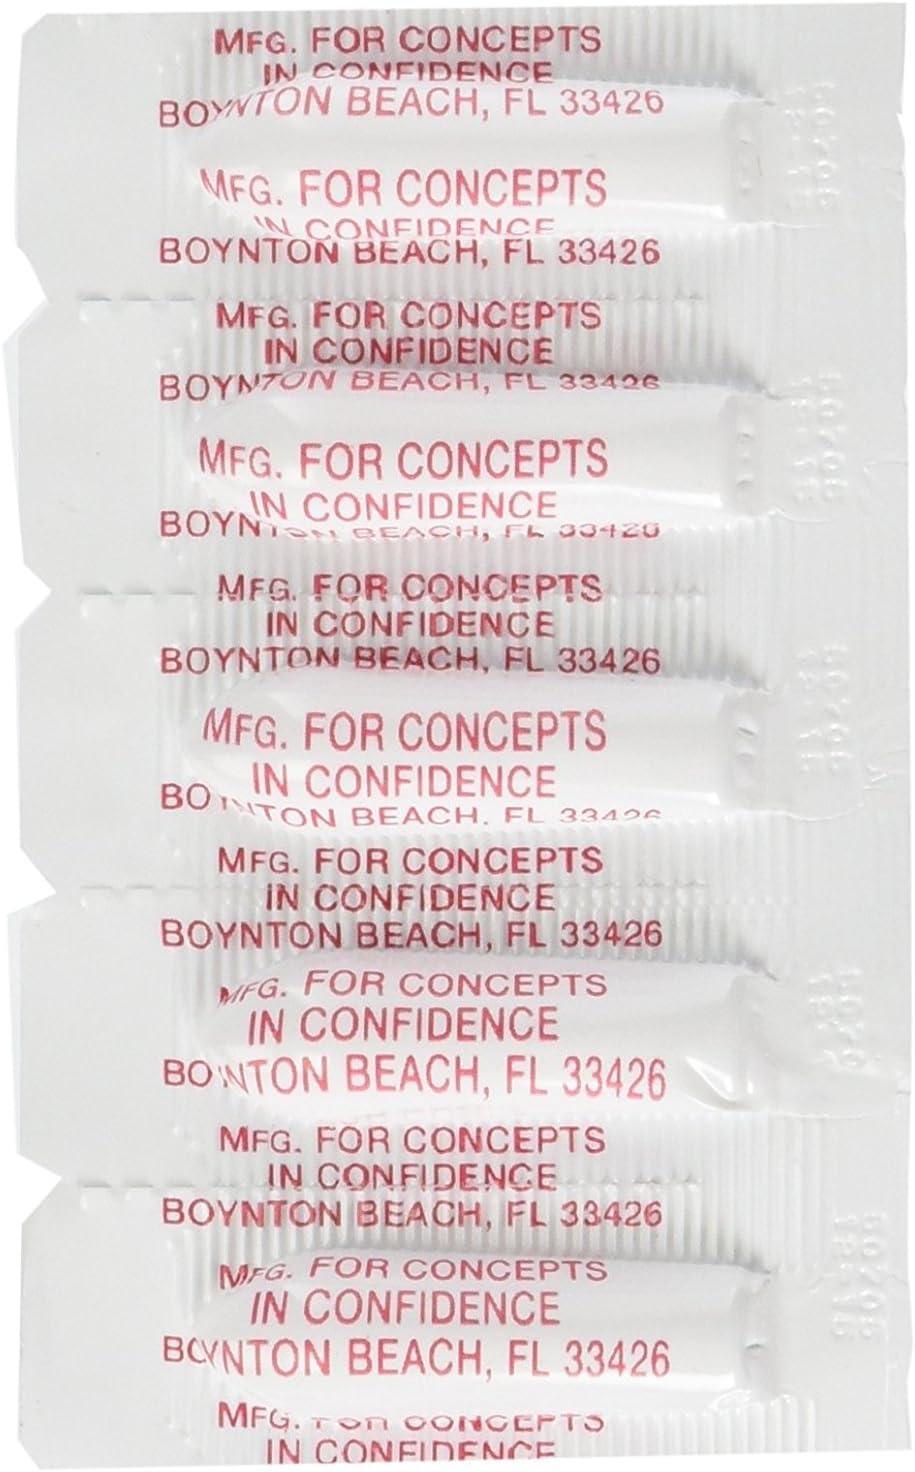 Magic Bullet Suppository for $59.50 per box of 100